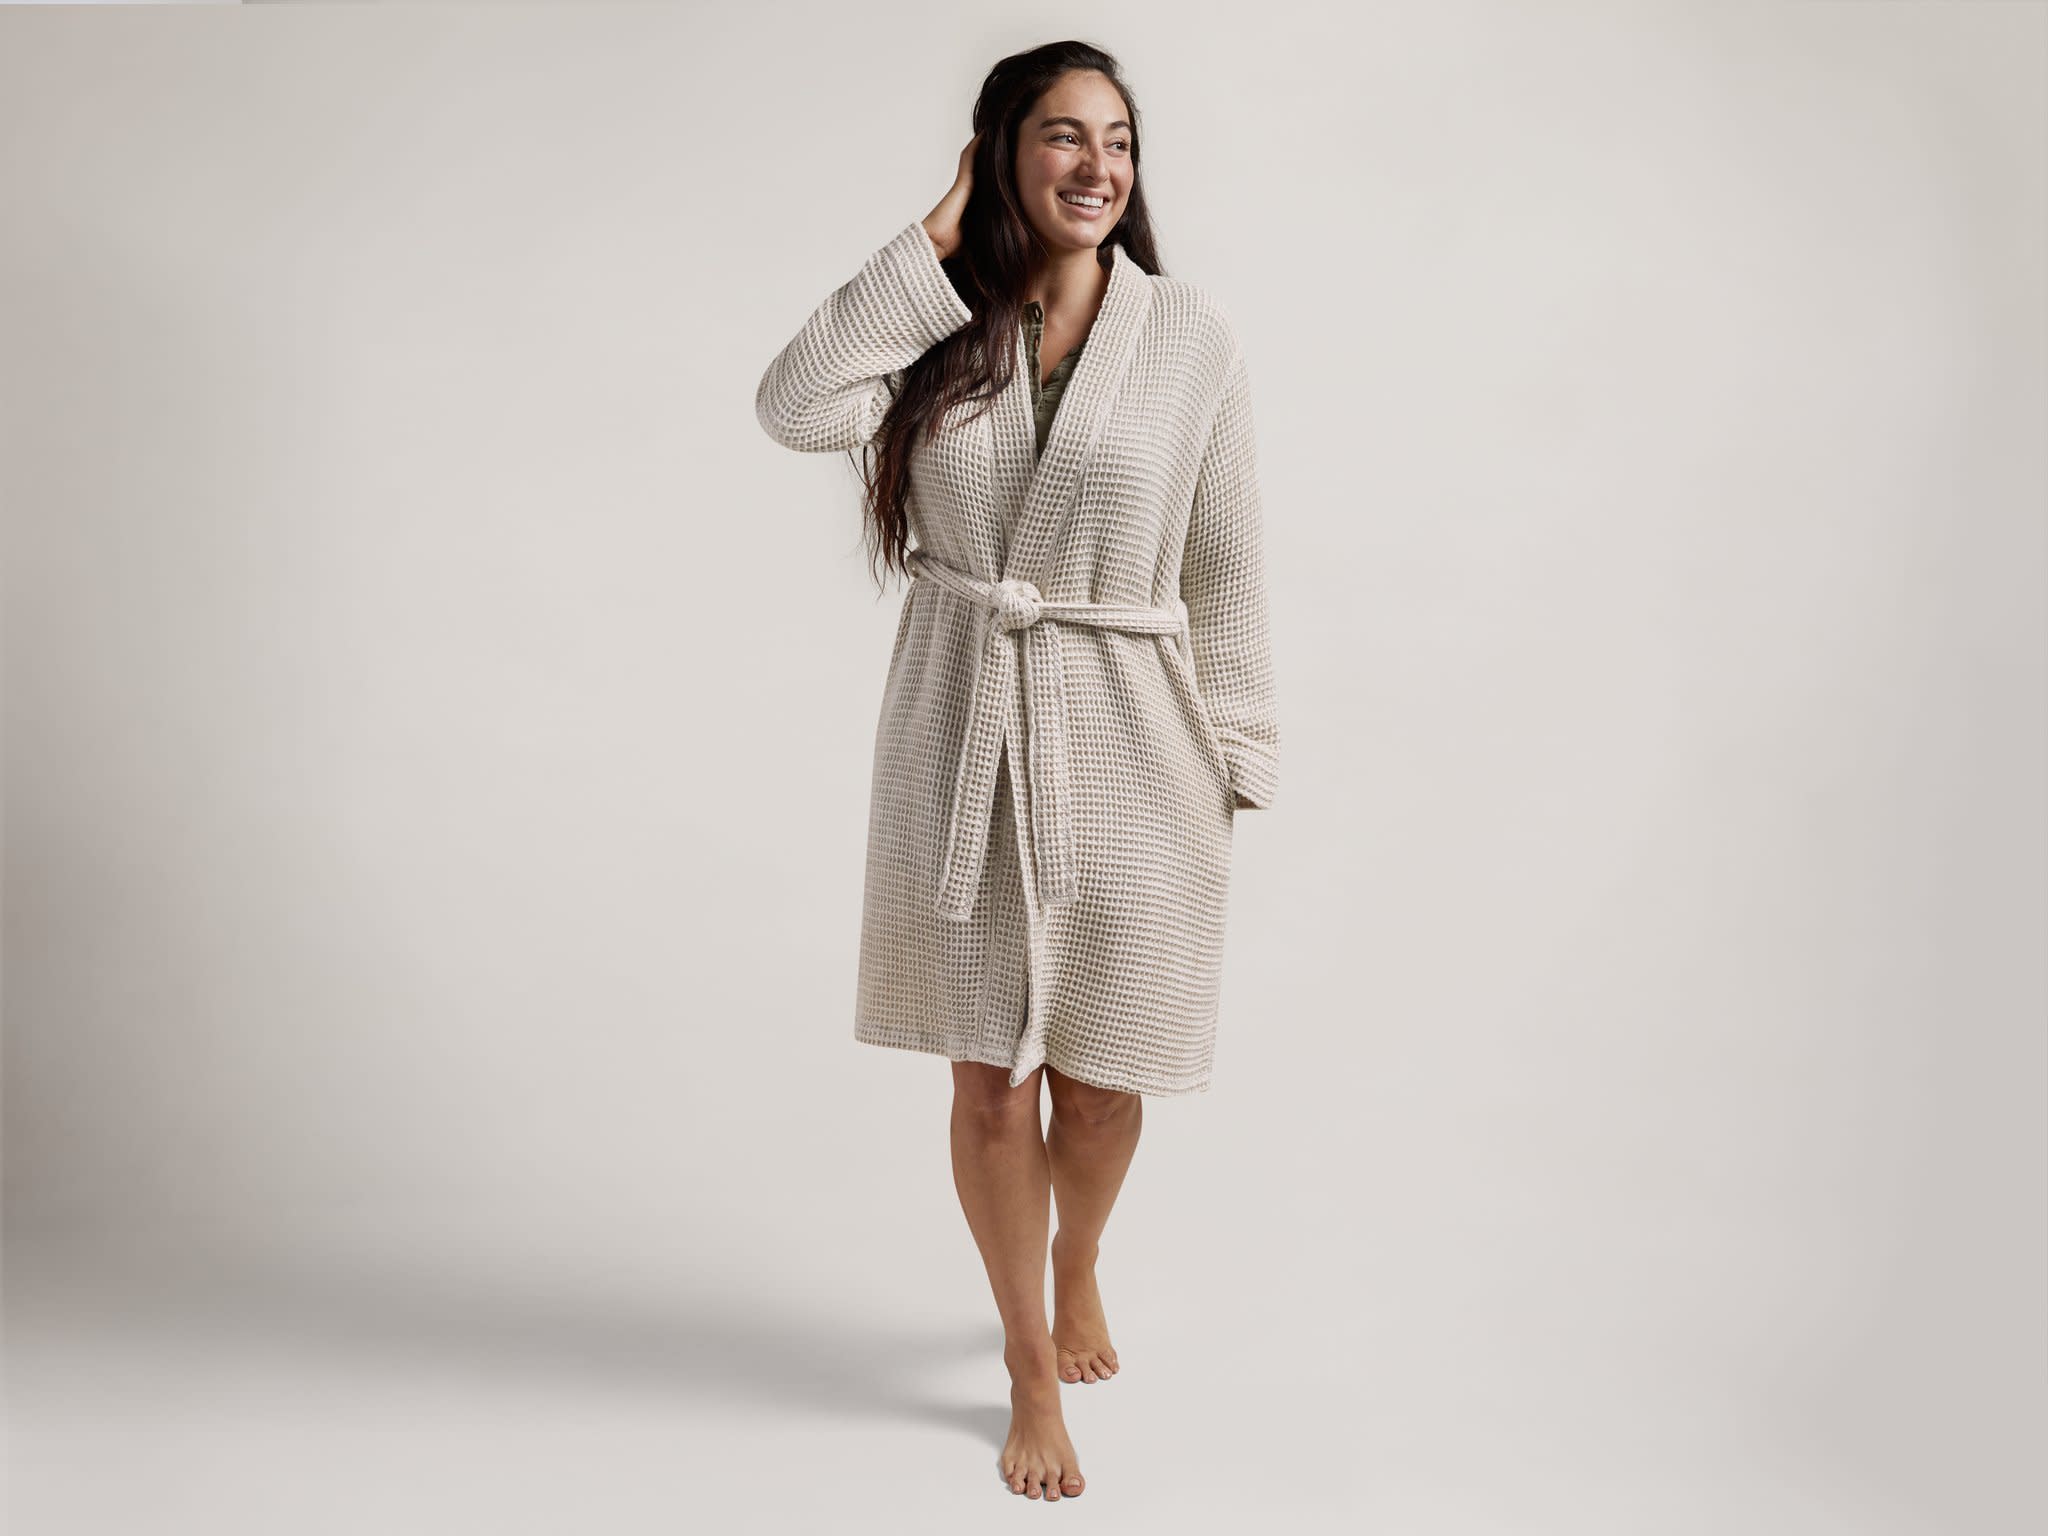 Tan Waffle Robe Shown In A Room